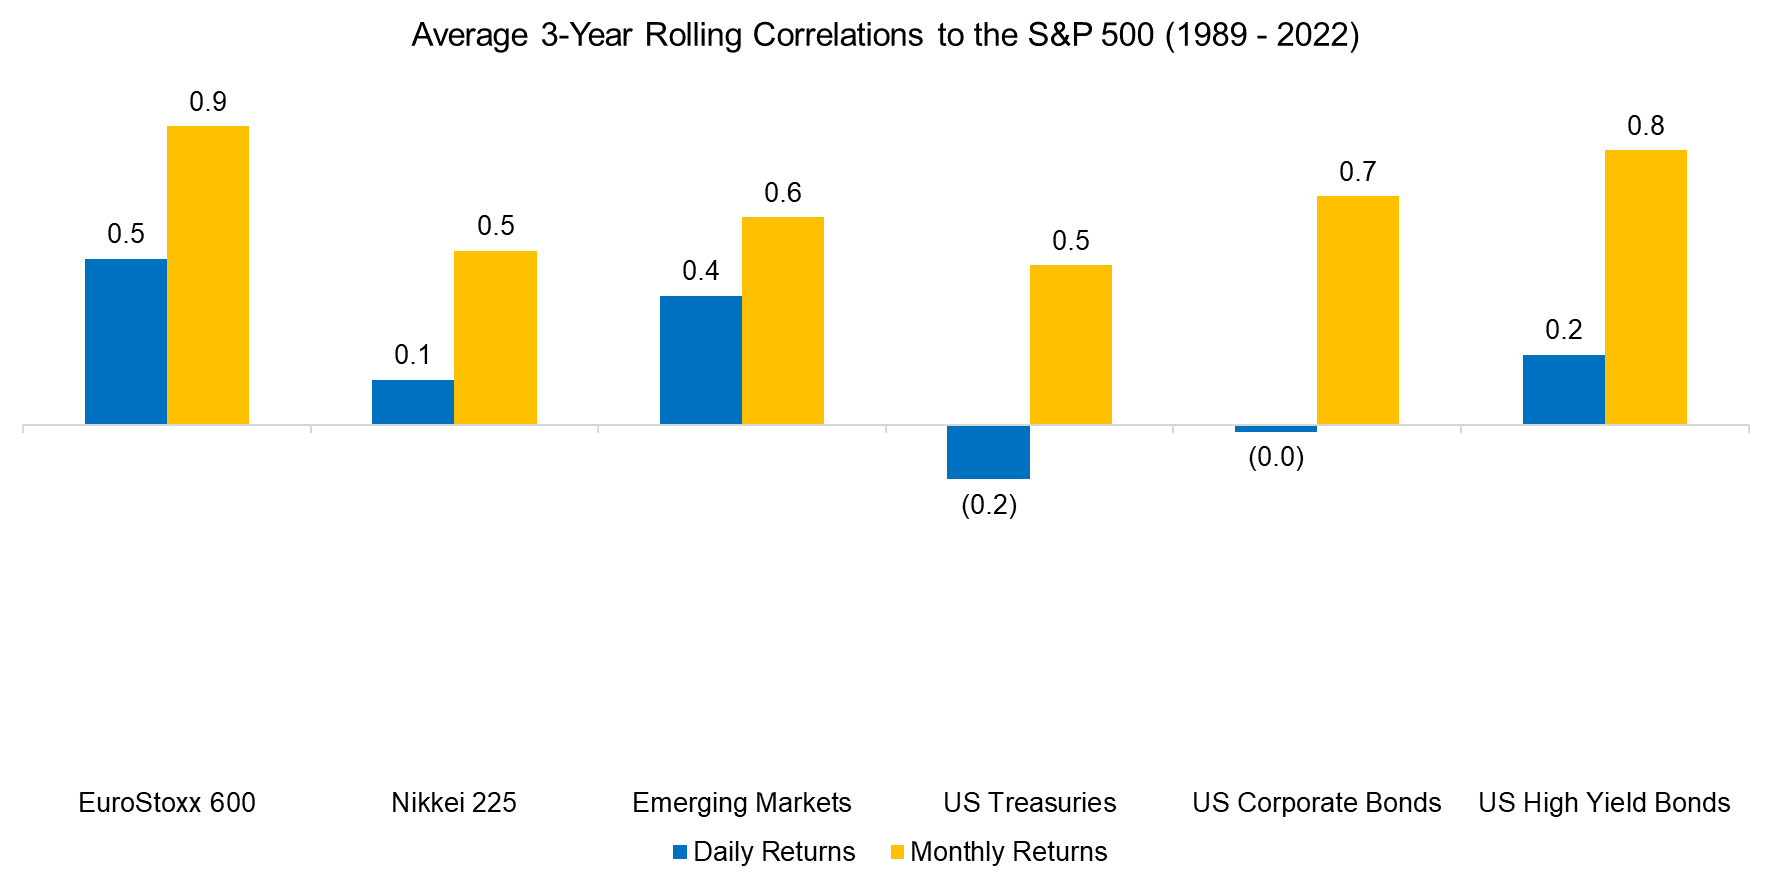 Average 3-Year Rolling Correlations to the S&P 500 (1989 - 2022)